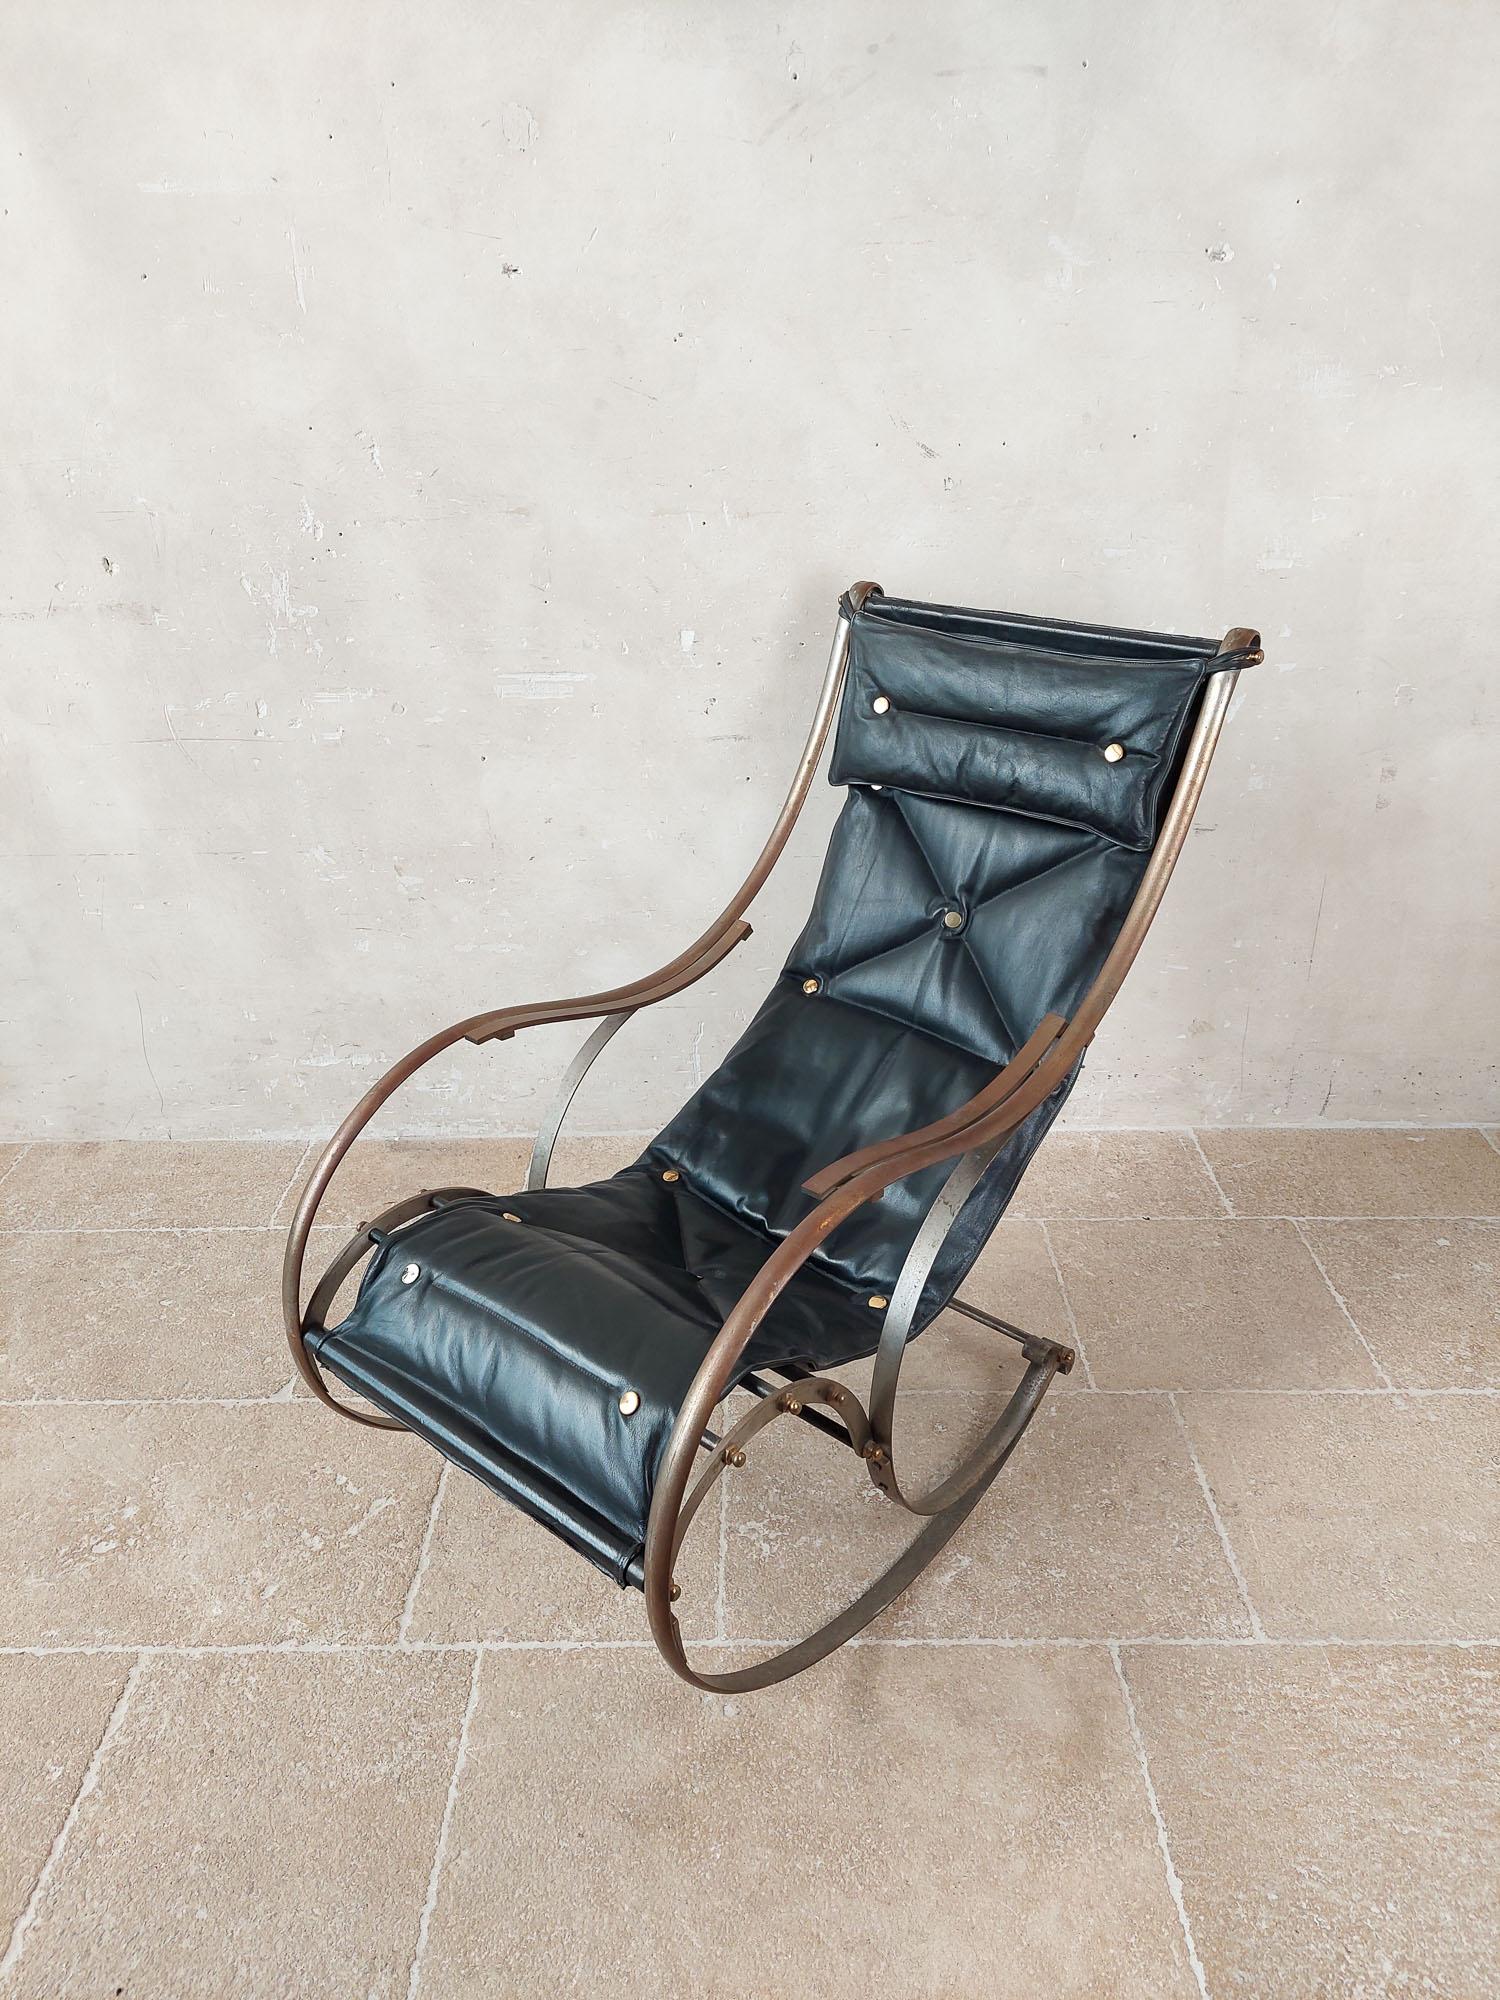 Antique leather and iron rocking chair. An English design classic from around 1850, this rocking chair was designed by the Englishman Peter Cooper for the company R.W. Winfield & Co., Birmingham, England. It has a steel frame with black leather